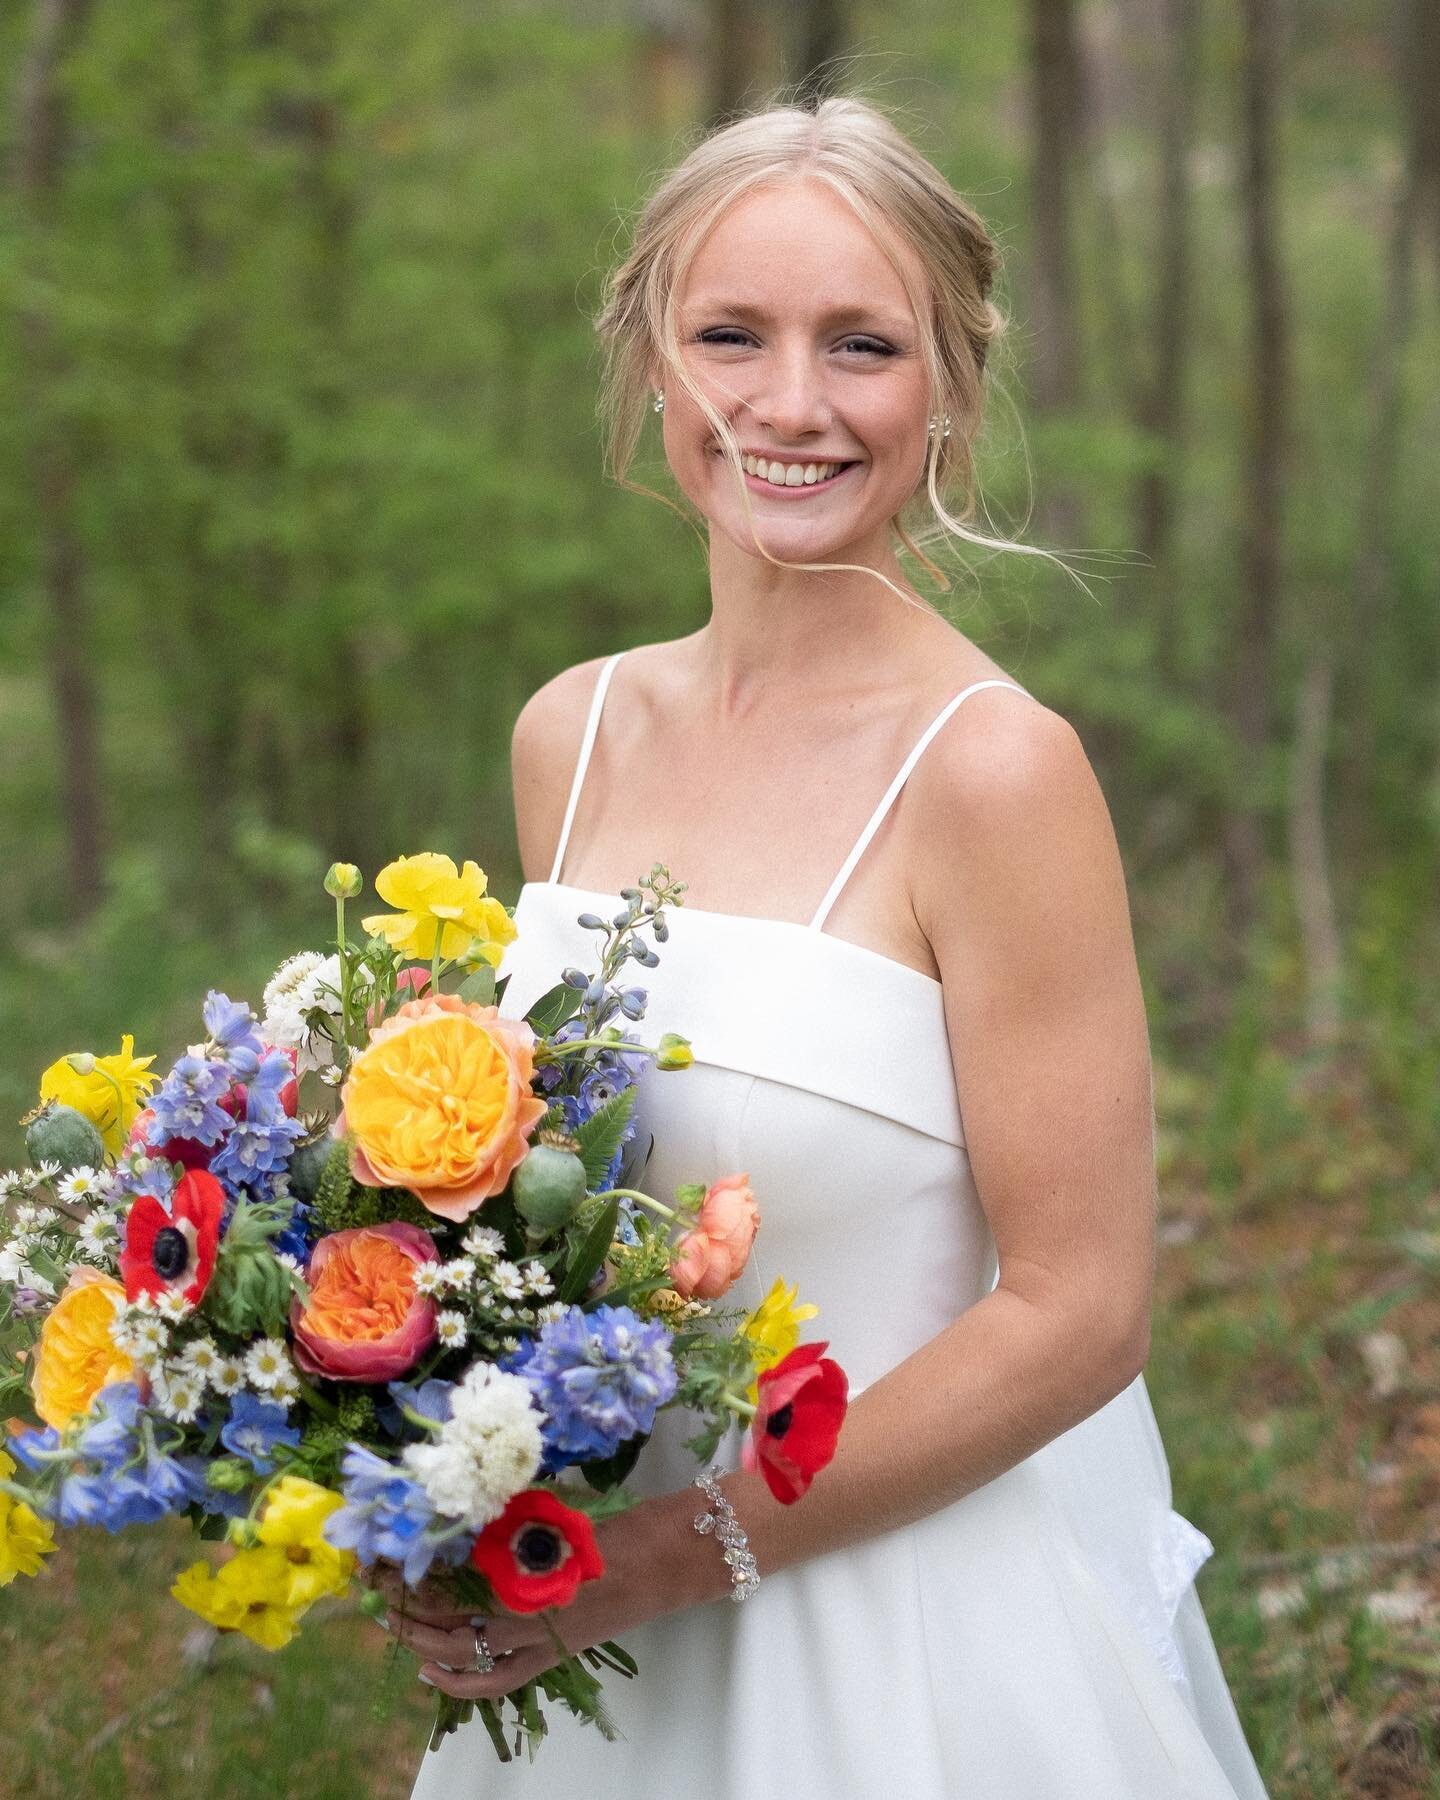 Playful, bright, adventurous,&amp; easy-going&hellip;we took all the wonderful things we love about Grace &amp; put them into her bouquet! Peachy-yellow garden roses, bright red anemones, golden butterfly ranunculus, &amp; sky-blue delphinium helped 